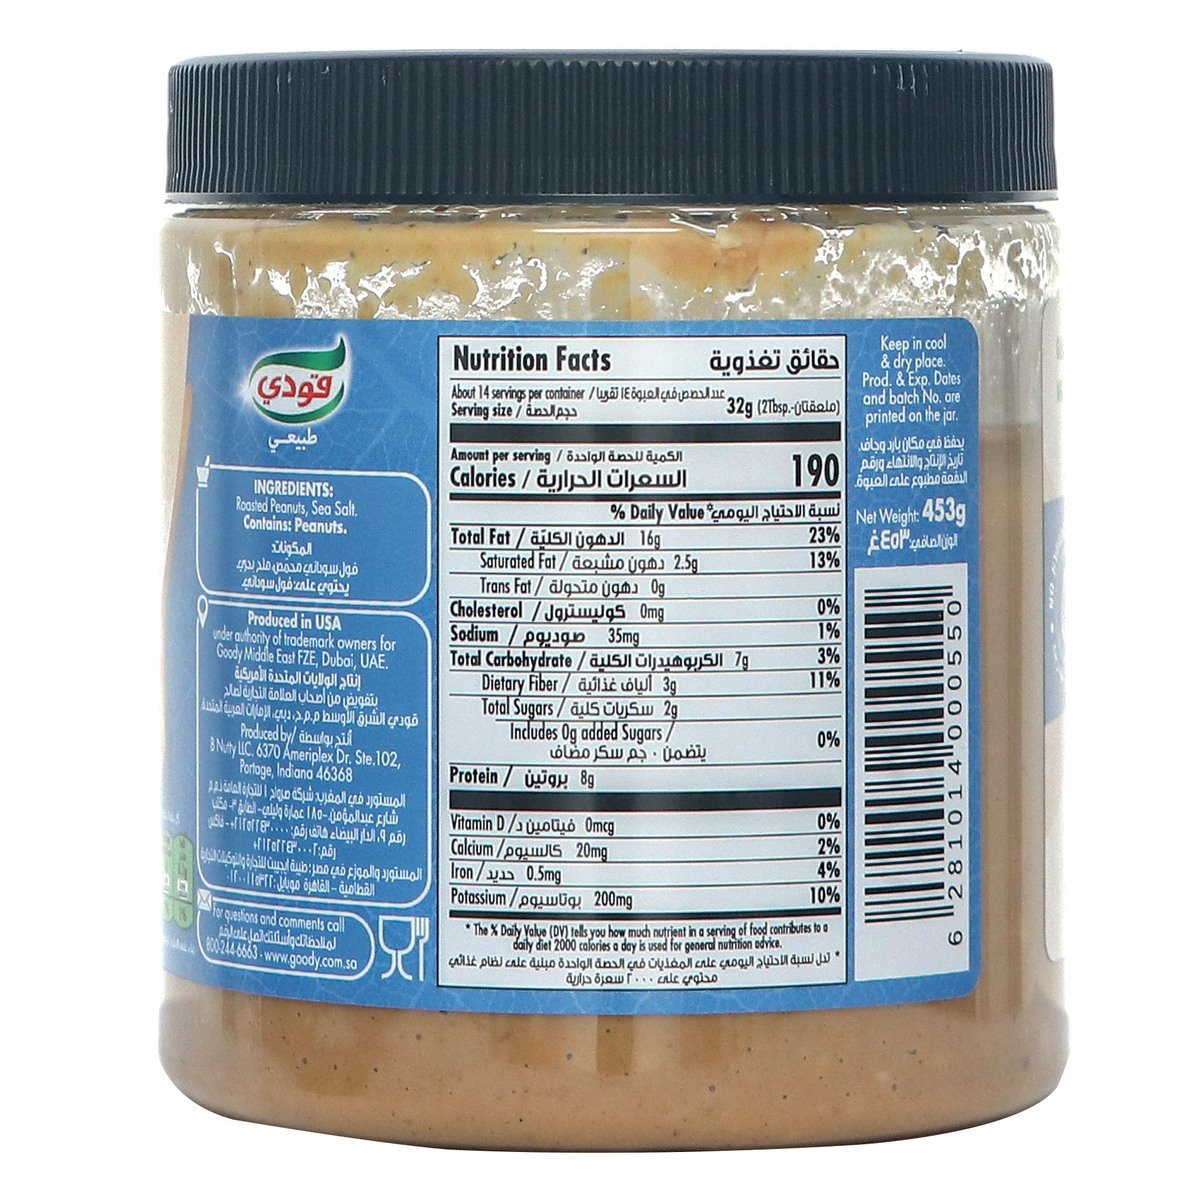 Goody Natural Chunky Peanut Butter Without Added Sugar 453 g